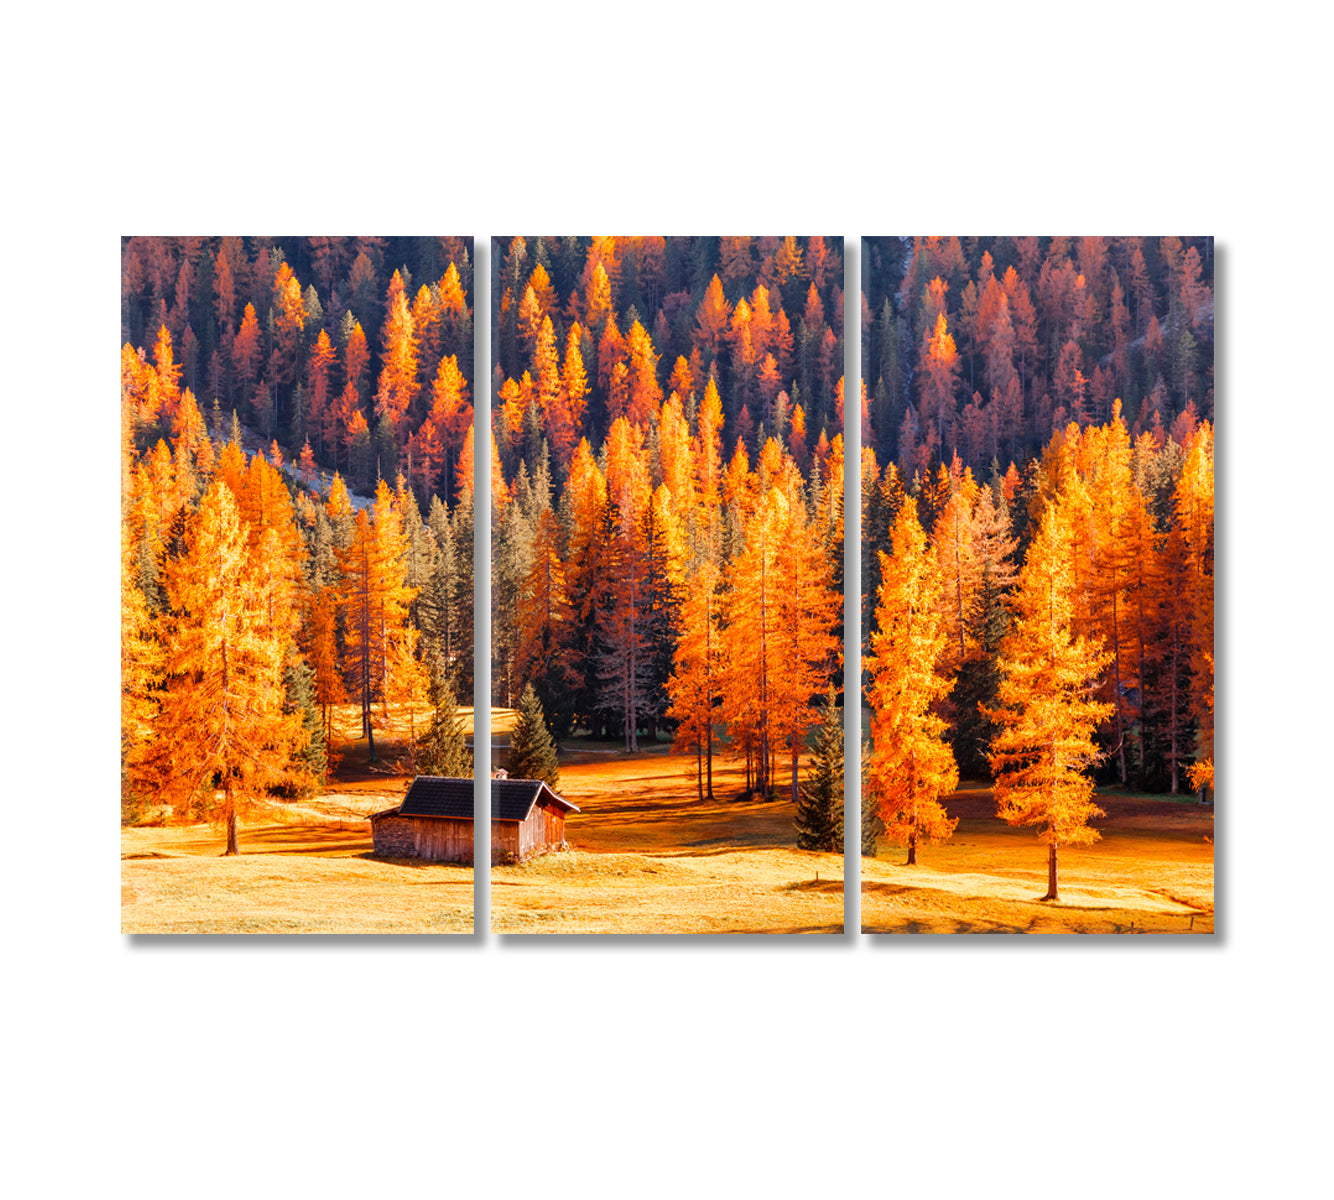 Wooden House Surrounded by Autumn Dolomites Trees Canvas Print-Canvas Print-CetArt-3 Panels-36x24 inches-CetArt